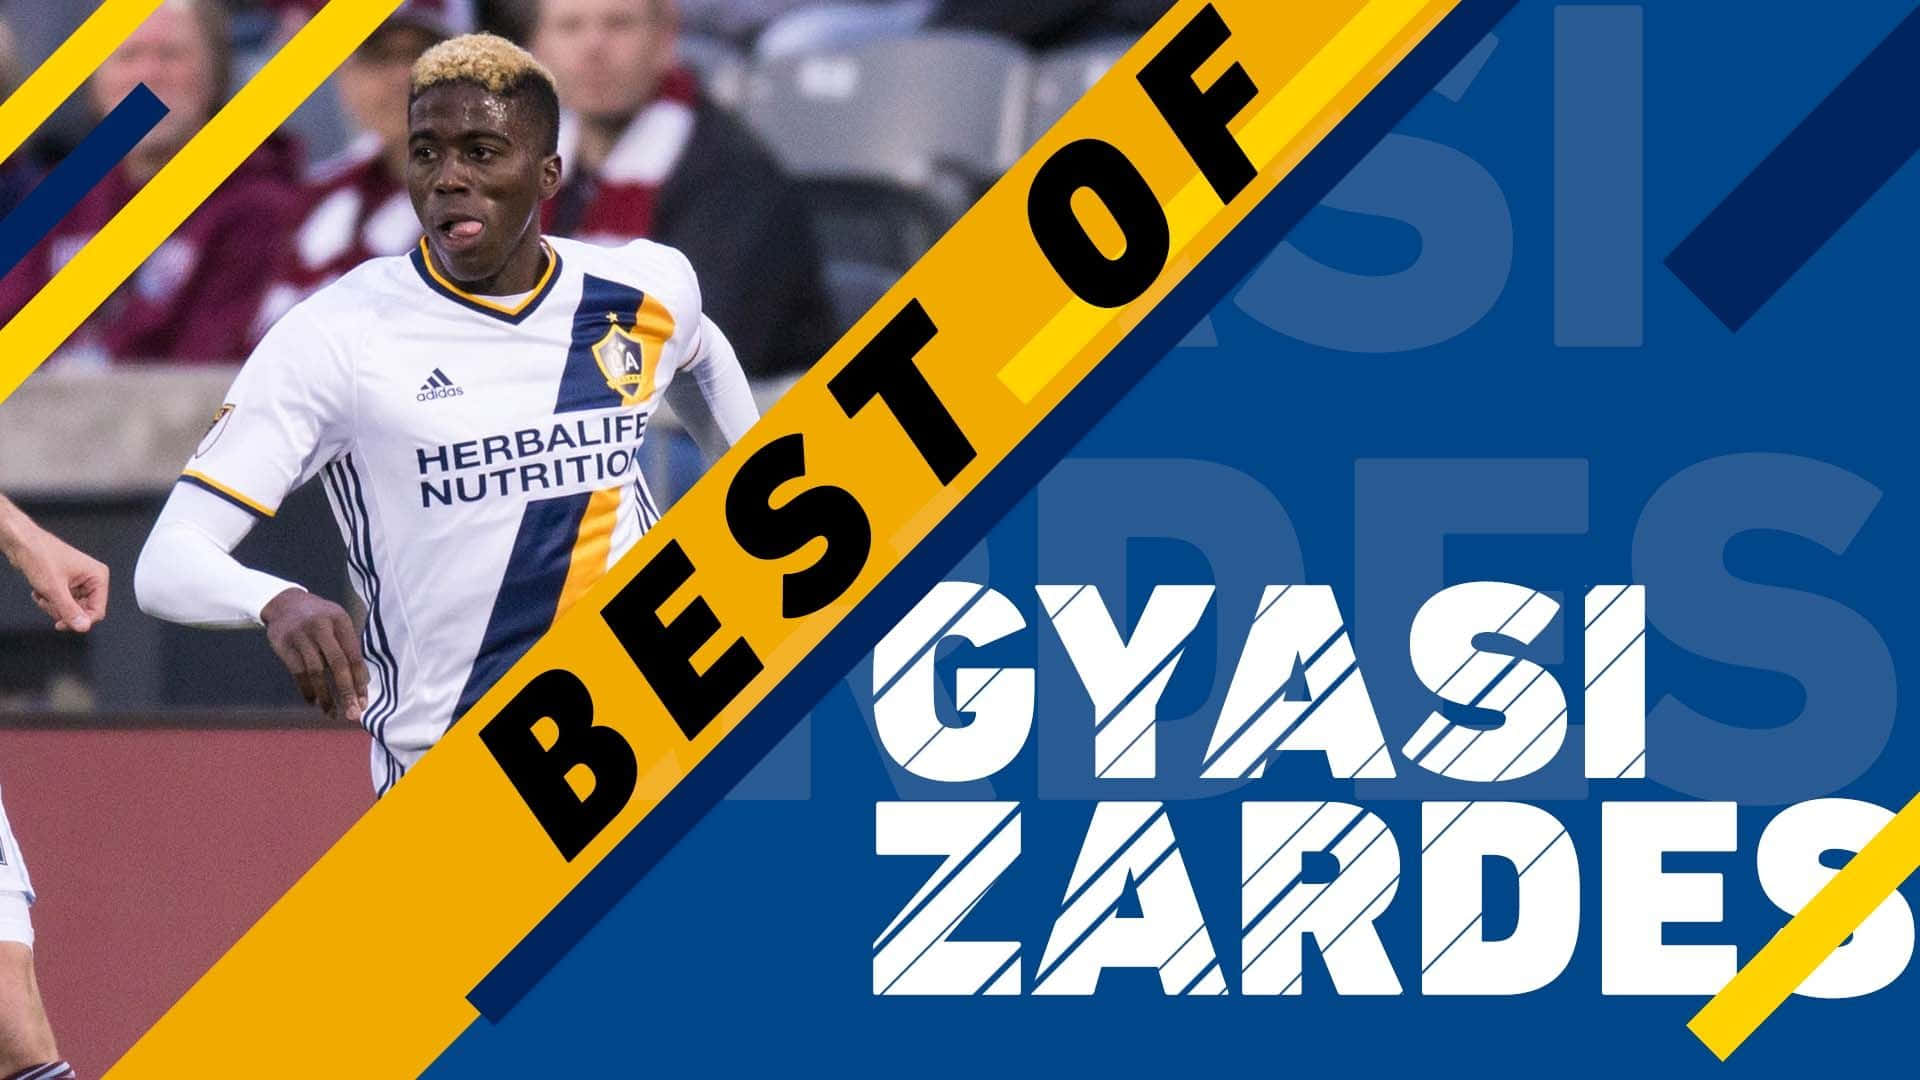 Acclaimed Soccer Player Gyasi Zardes In Action Wallpaper